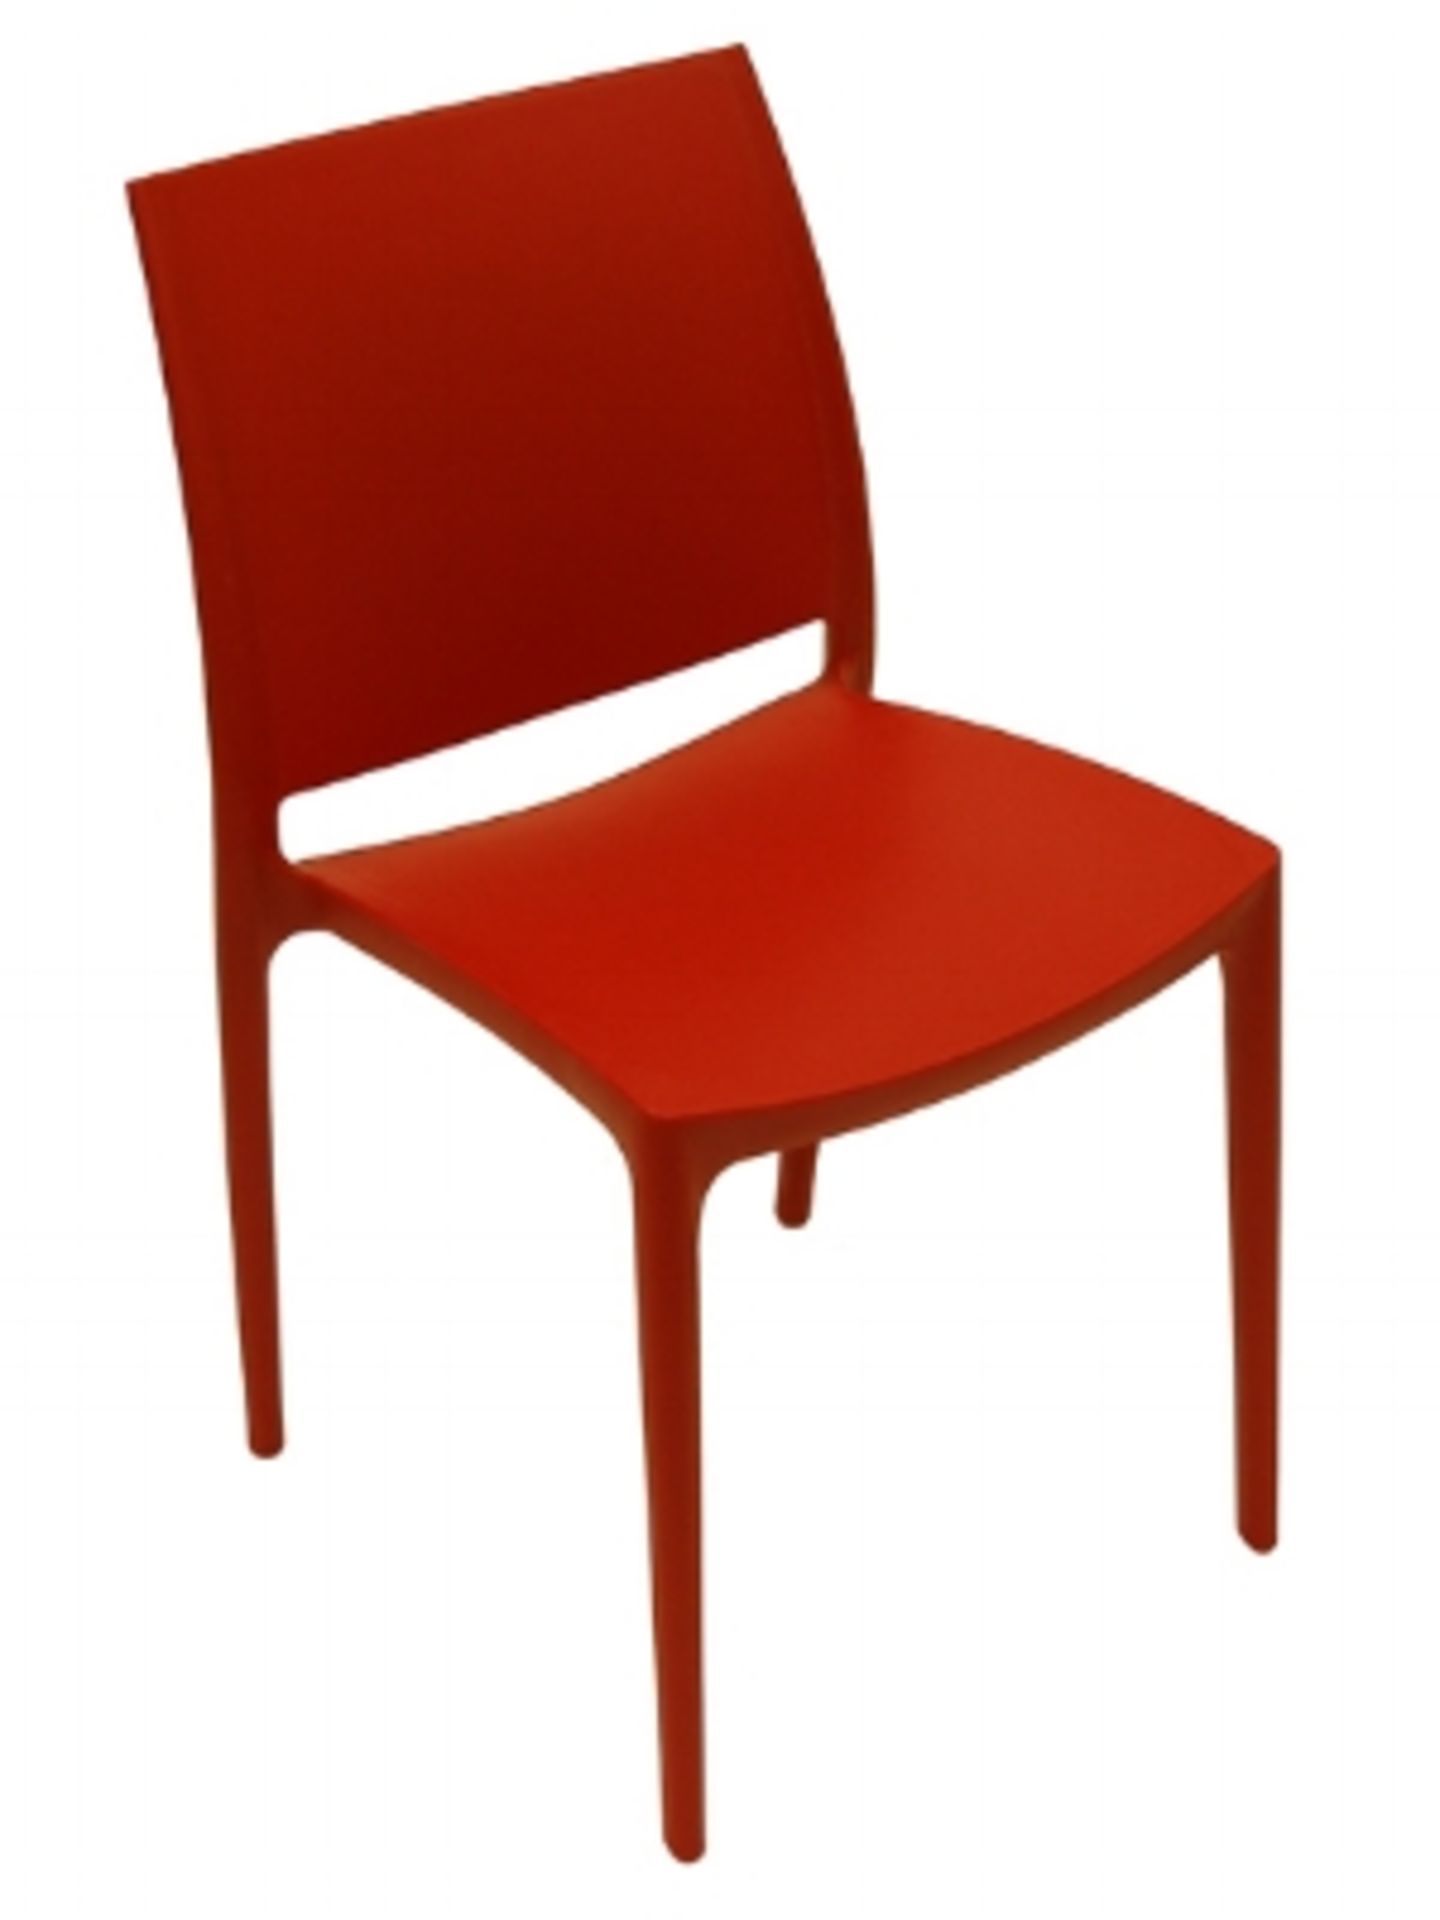 Martinique side chair - red, 8 boxes with 4 each, 32 total.